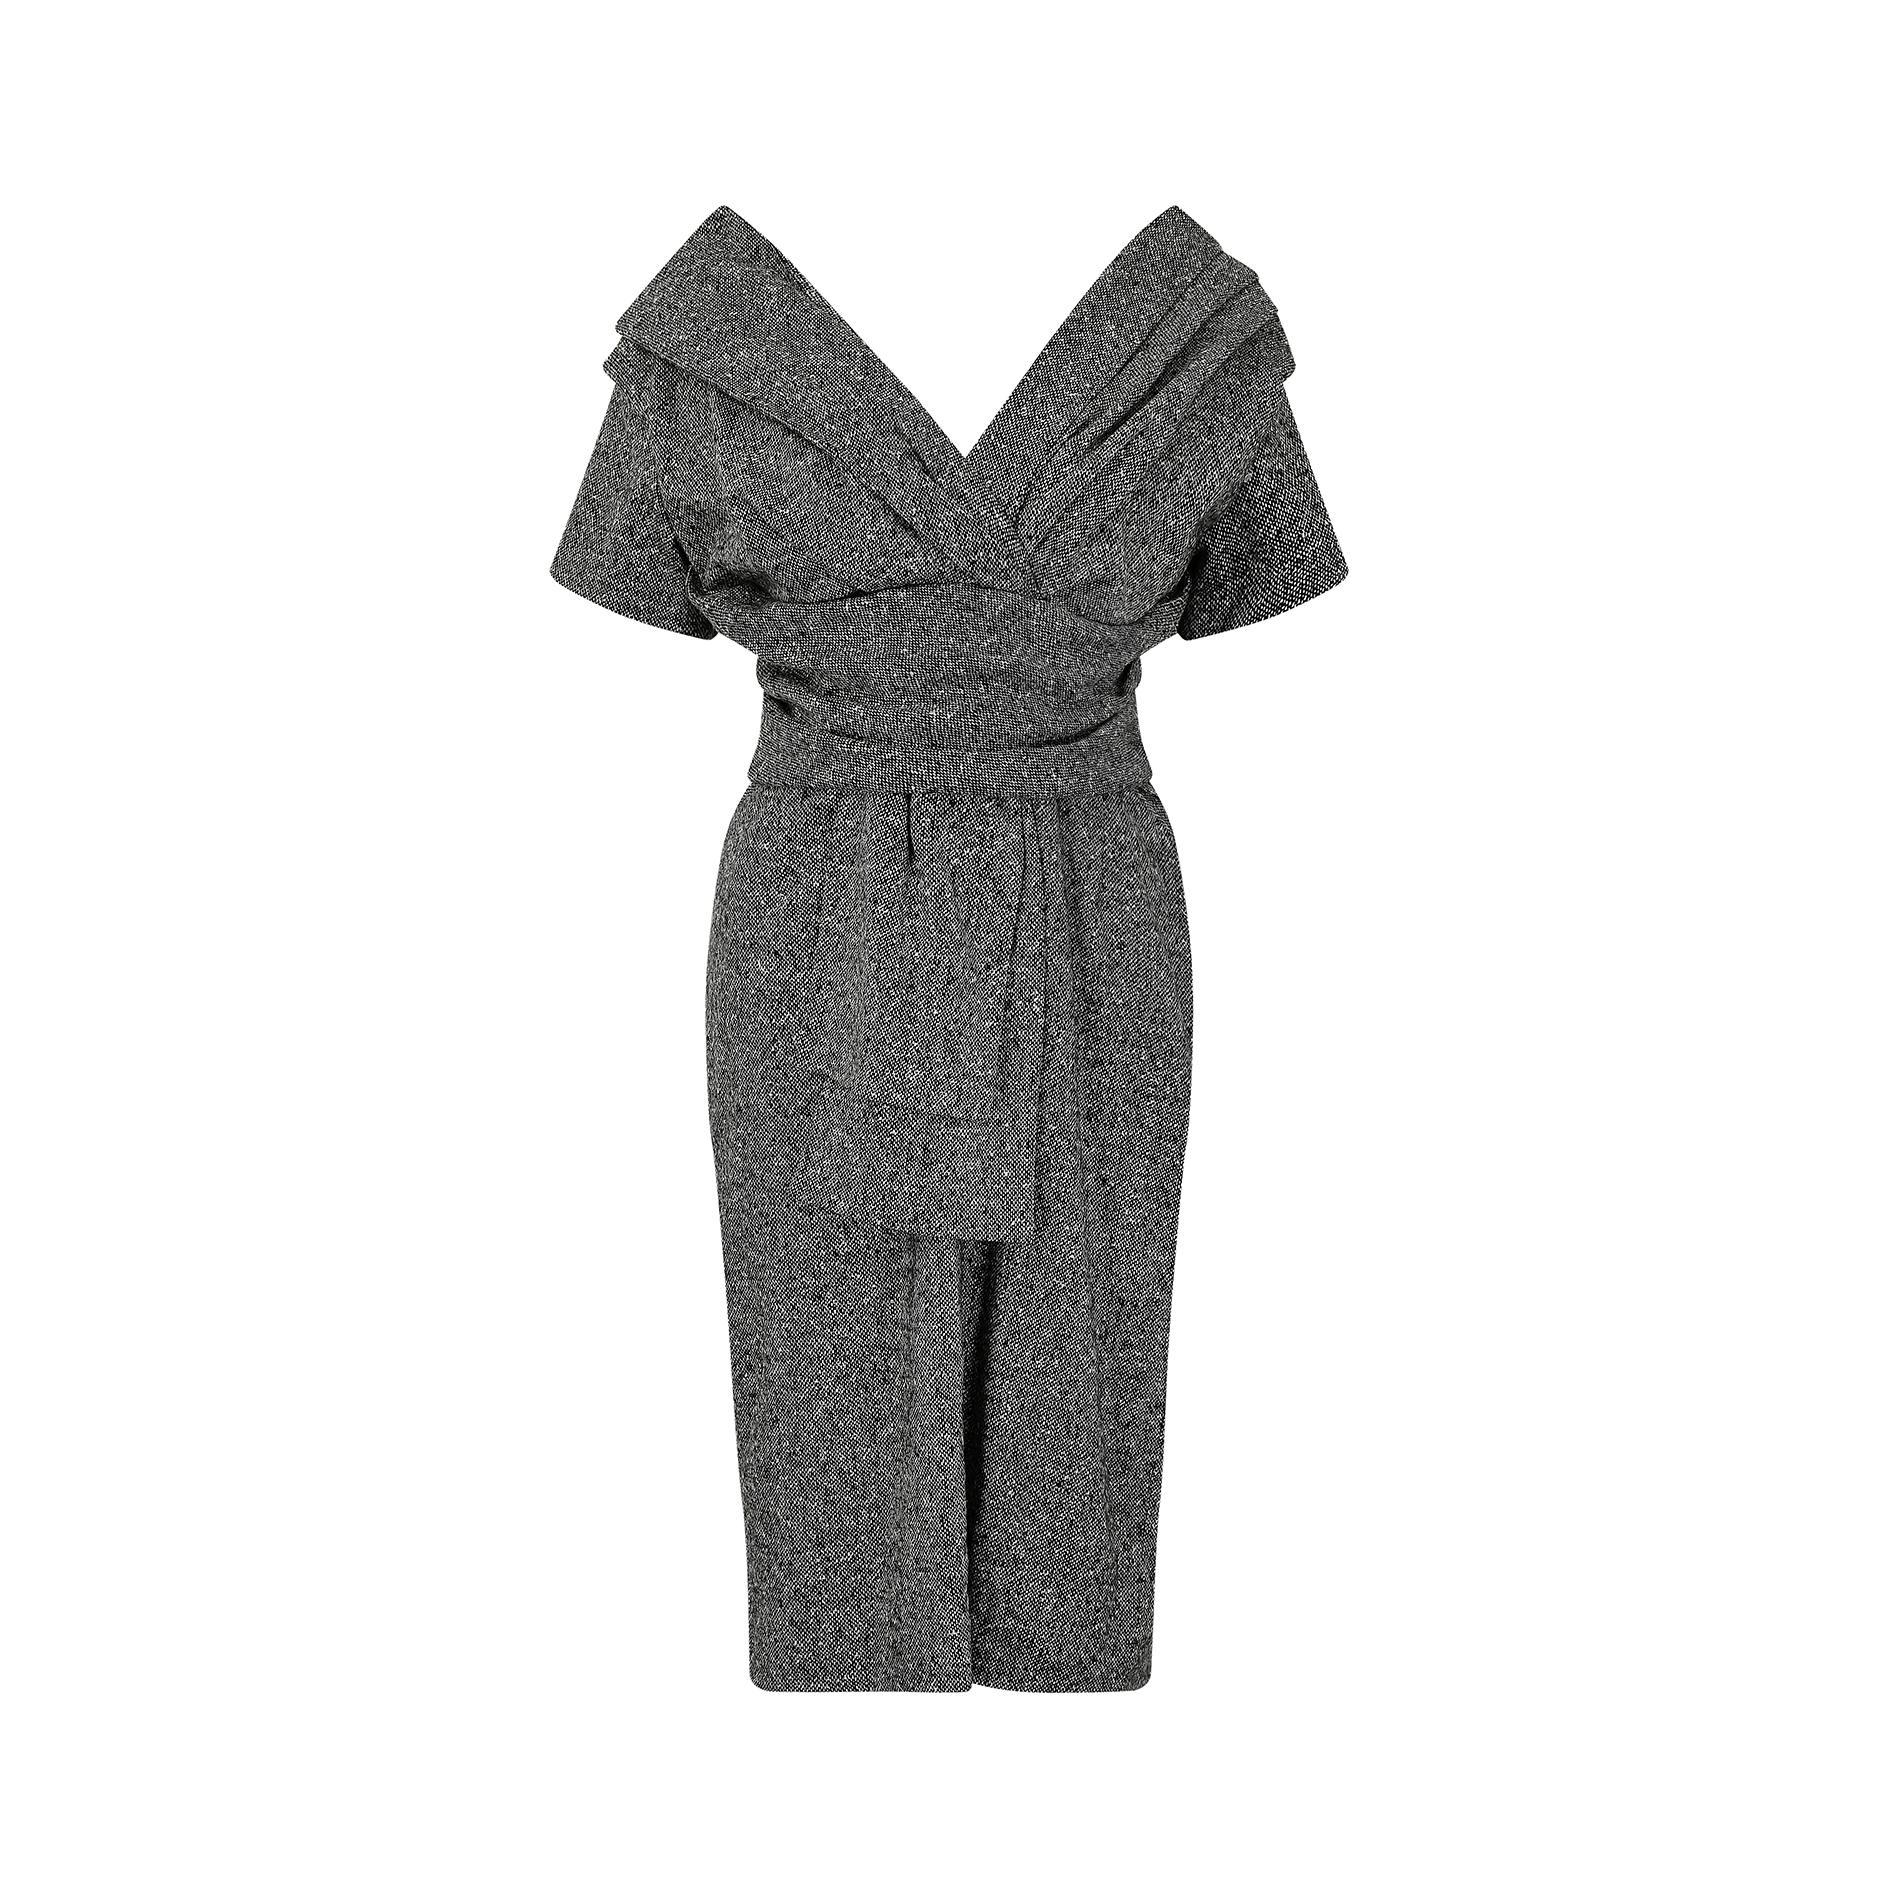 This fabulous Christian Dior grey tweed dress is from the 2007 autumn / winter collection and right after a young John Galliano moved across from Givenchy to become creative director, heralding in a dazzling new era for the venerable fashion house.